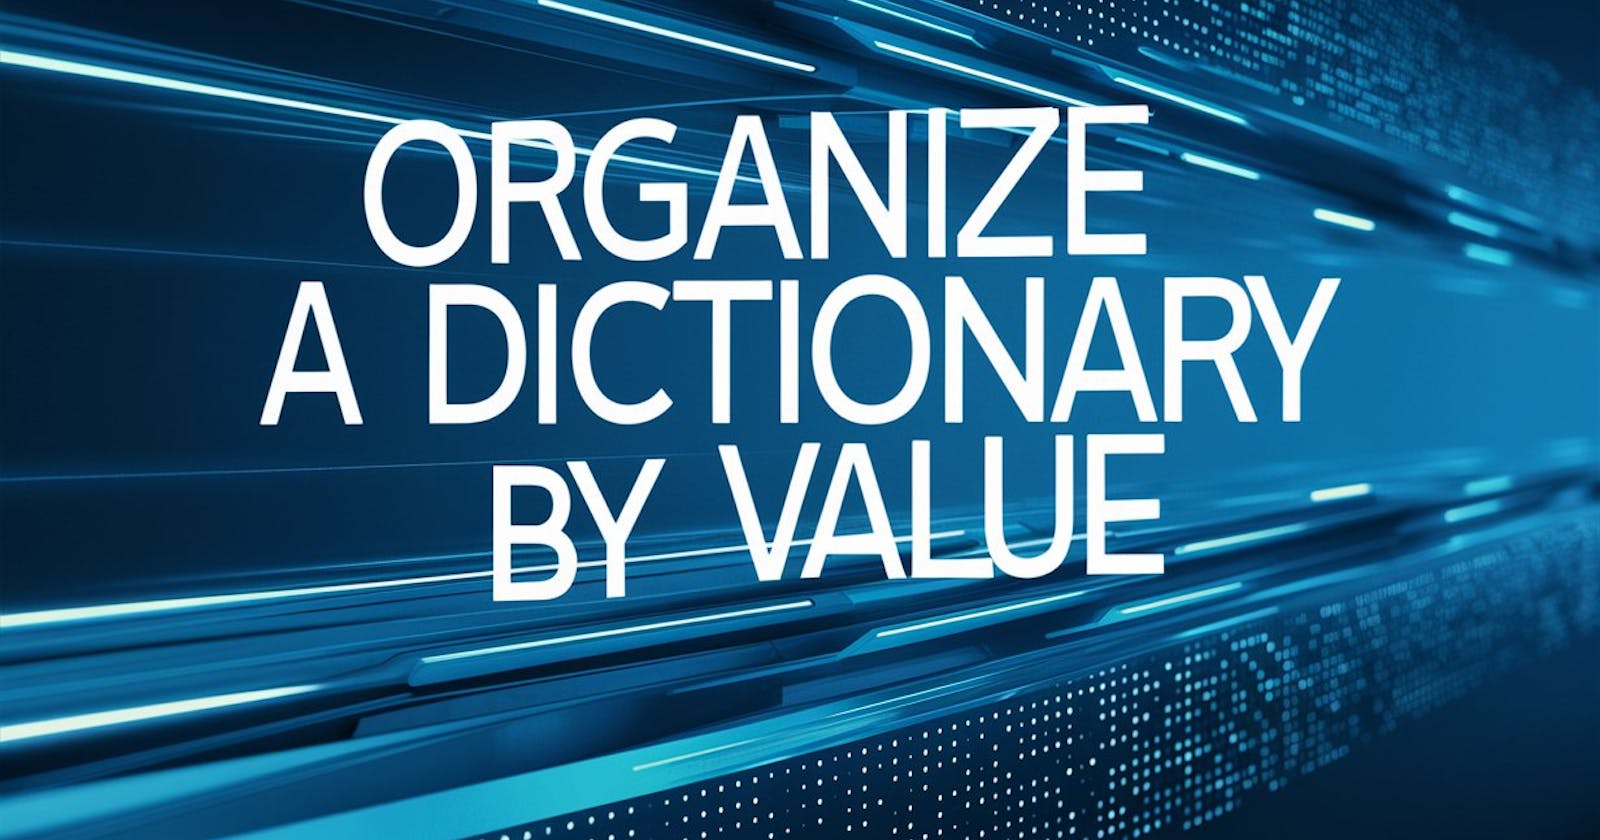 How to Organize a Dictionary by Value: Top 5 Examples